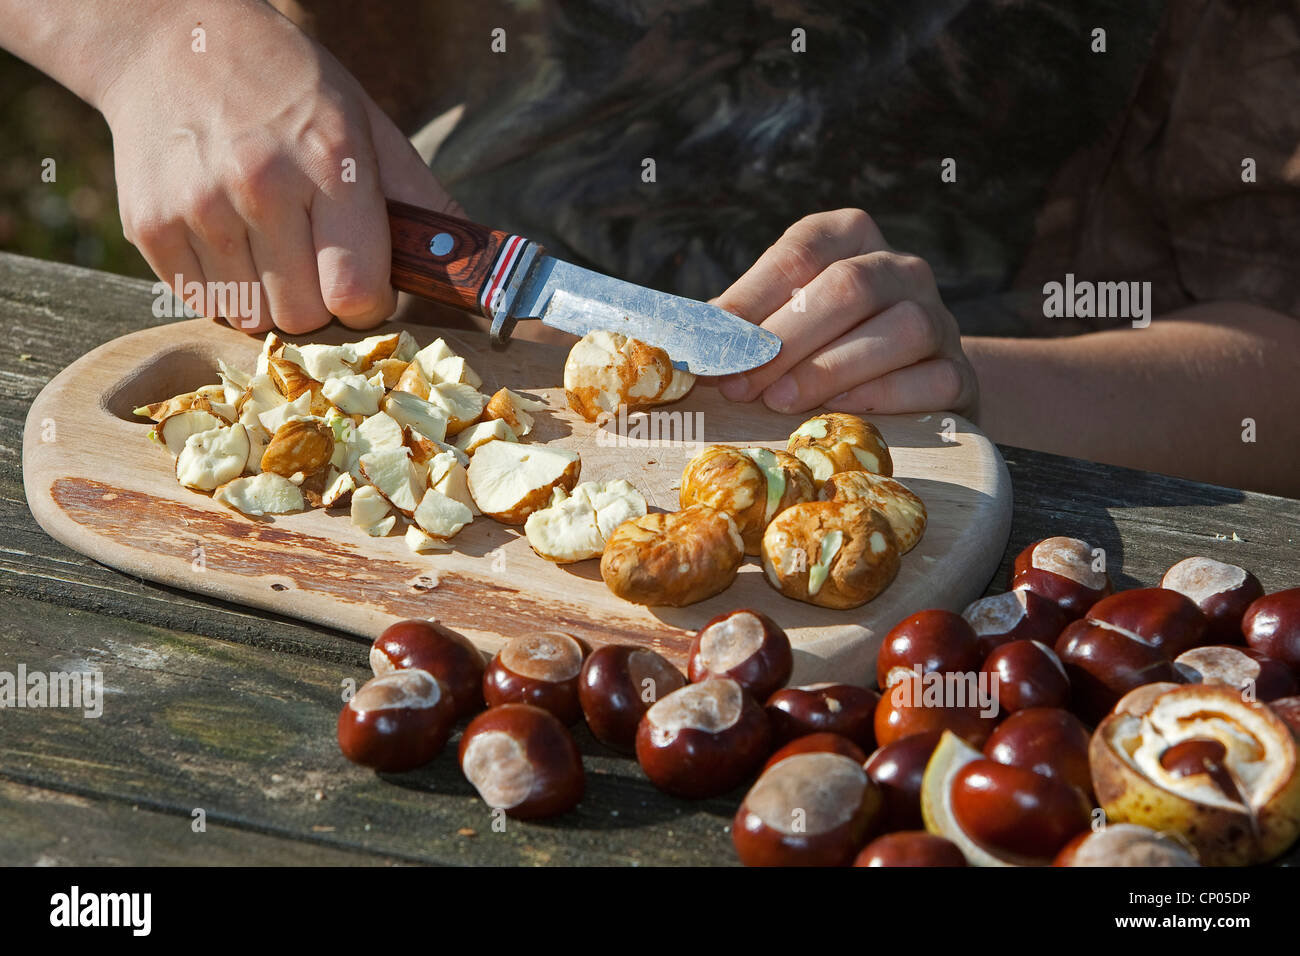 common horse chestnut (Aesculus hippocastanum), making soap from horse chestnuts: child mincing conkers with a knife on a cutting board Stock Photo